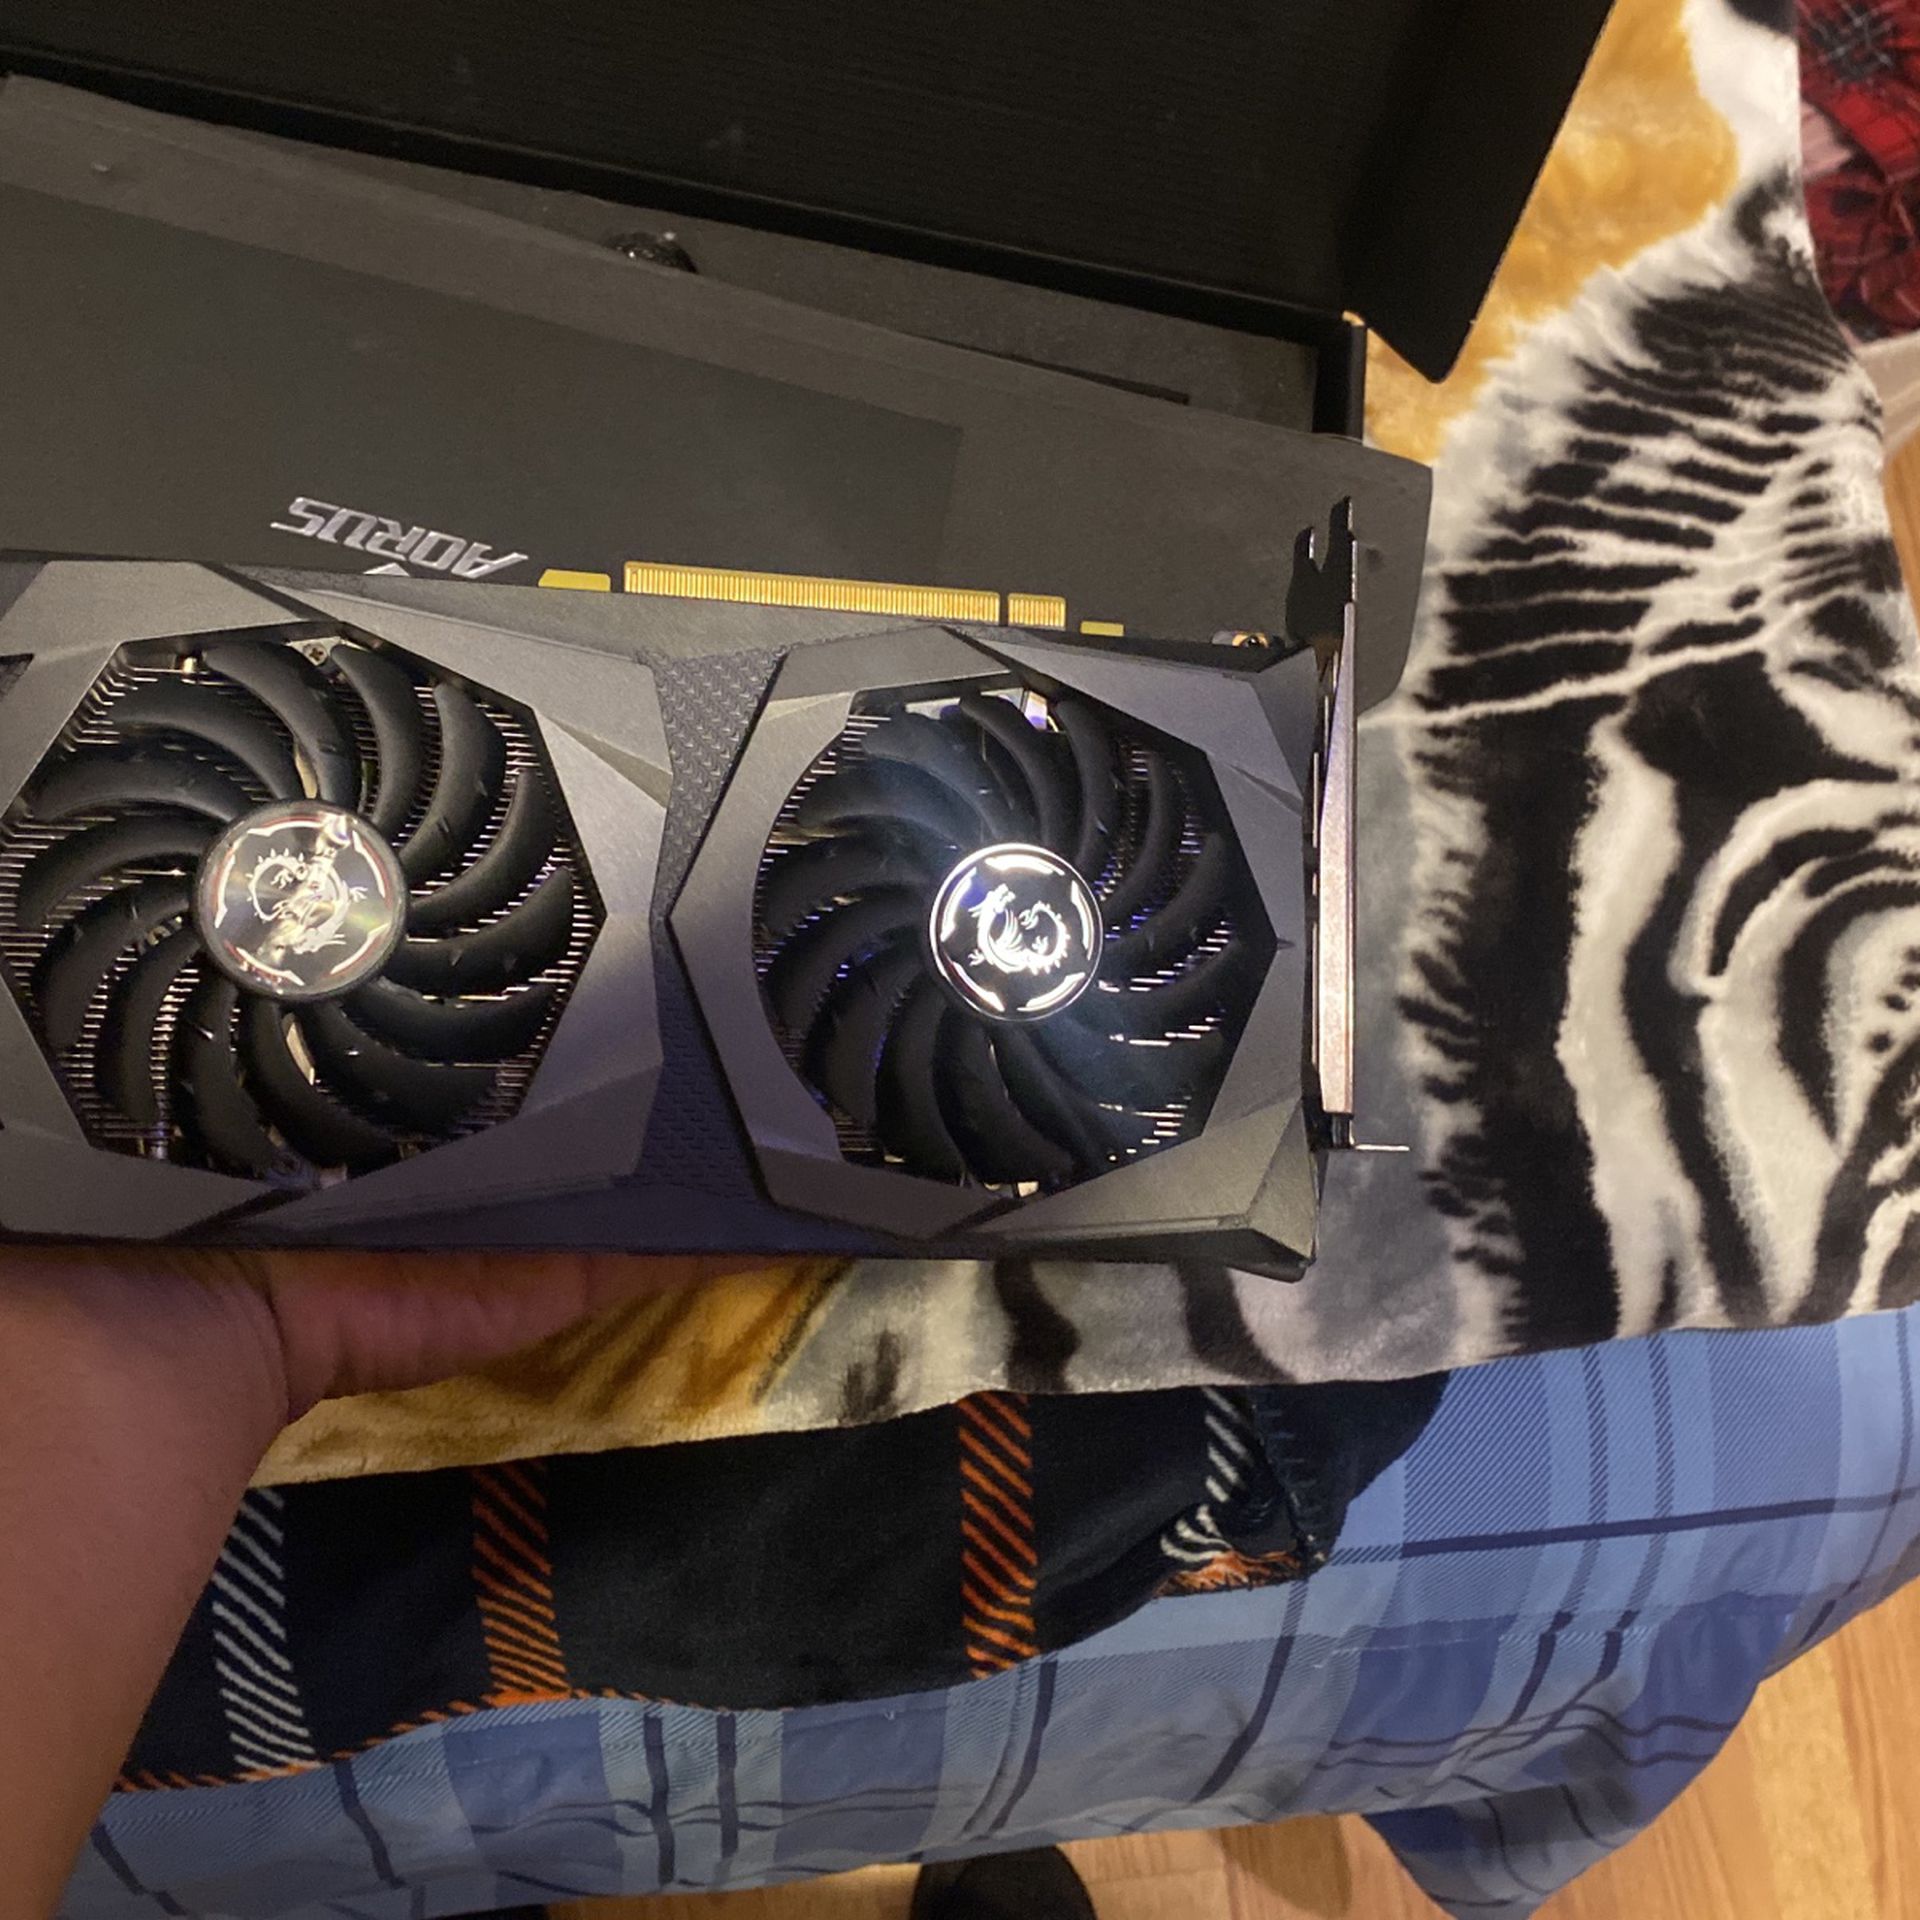 MSI Gaming GeForce GTX 1660 Super 192-bit HDMI/DP 6GB GDRR6 HDCP Support 12 Dual Fan OC Graphics Card (GTX 1660 Super Gaming X) for Sale in Stickney, IL - OfferUp